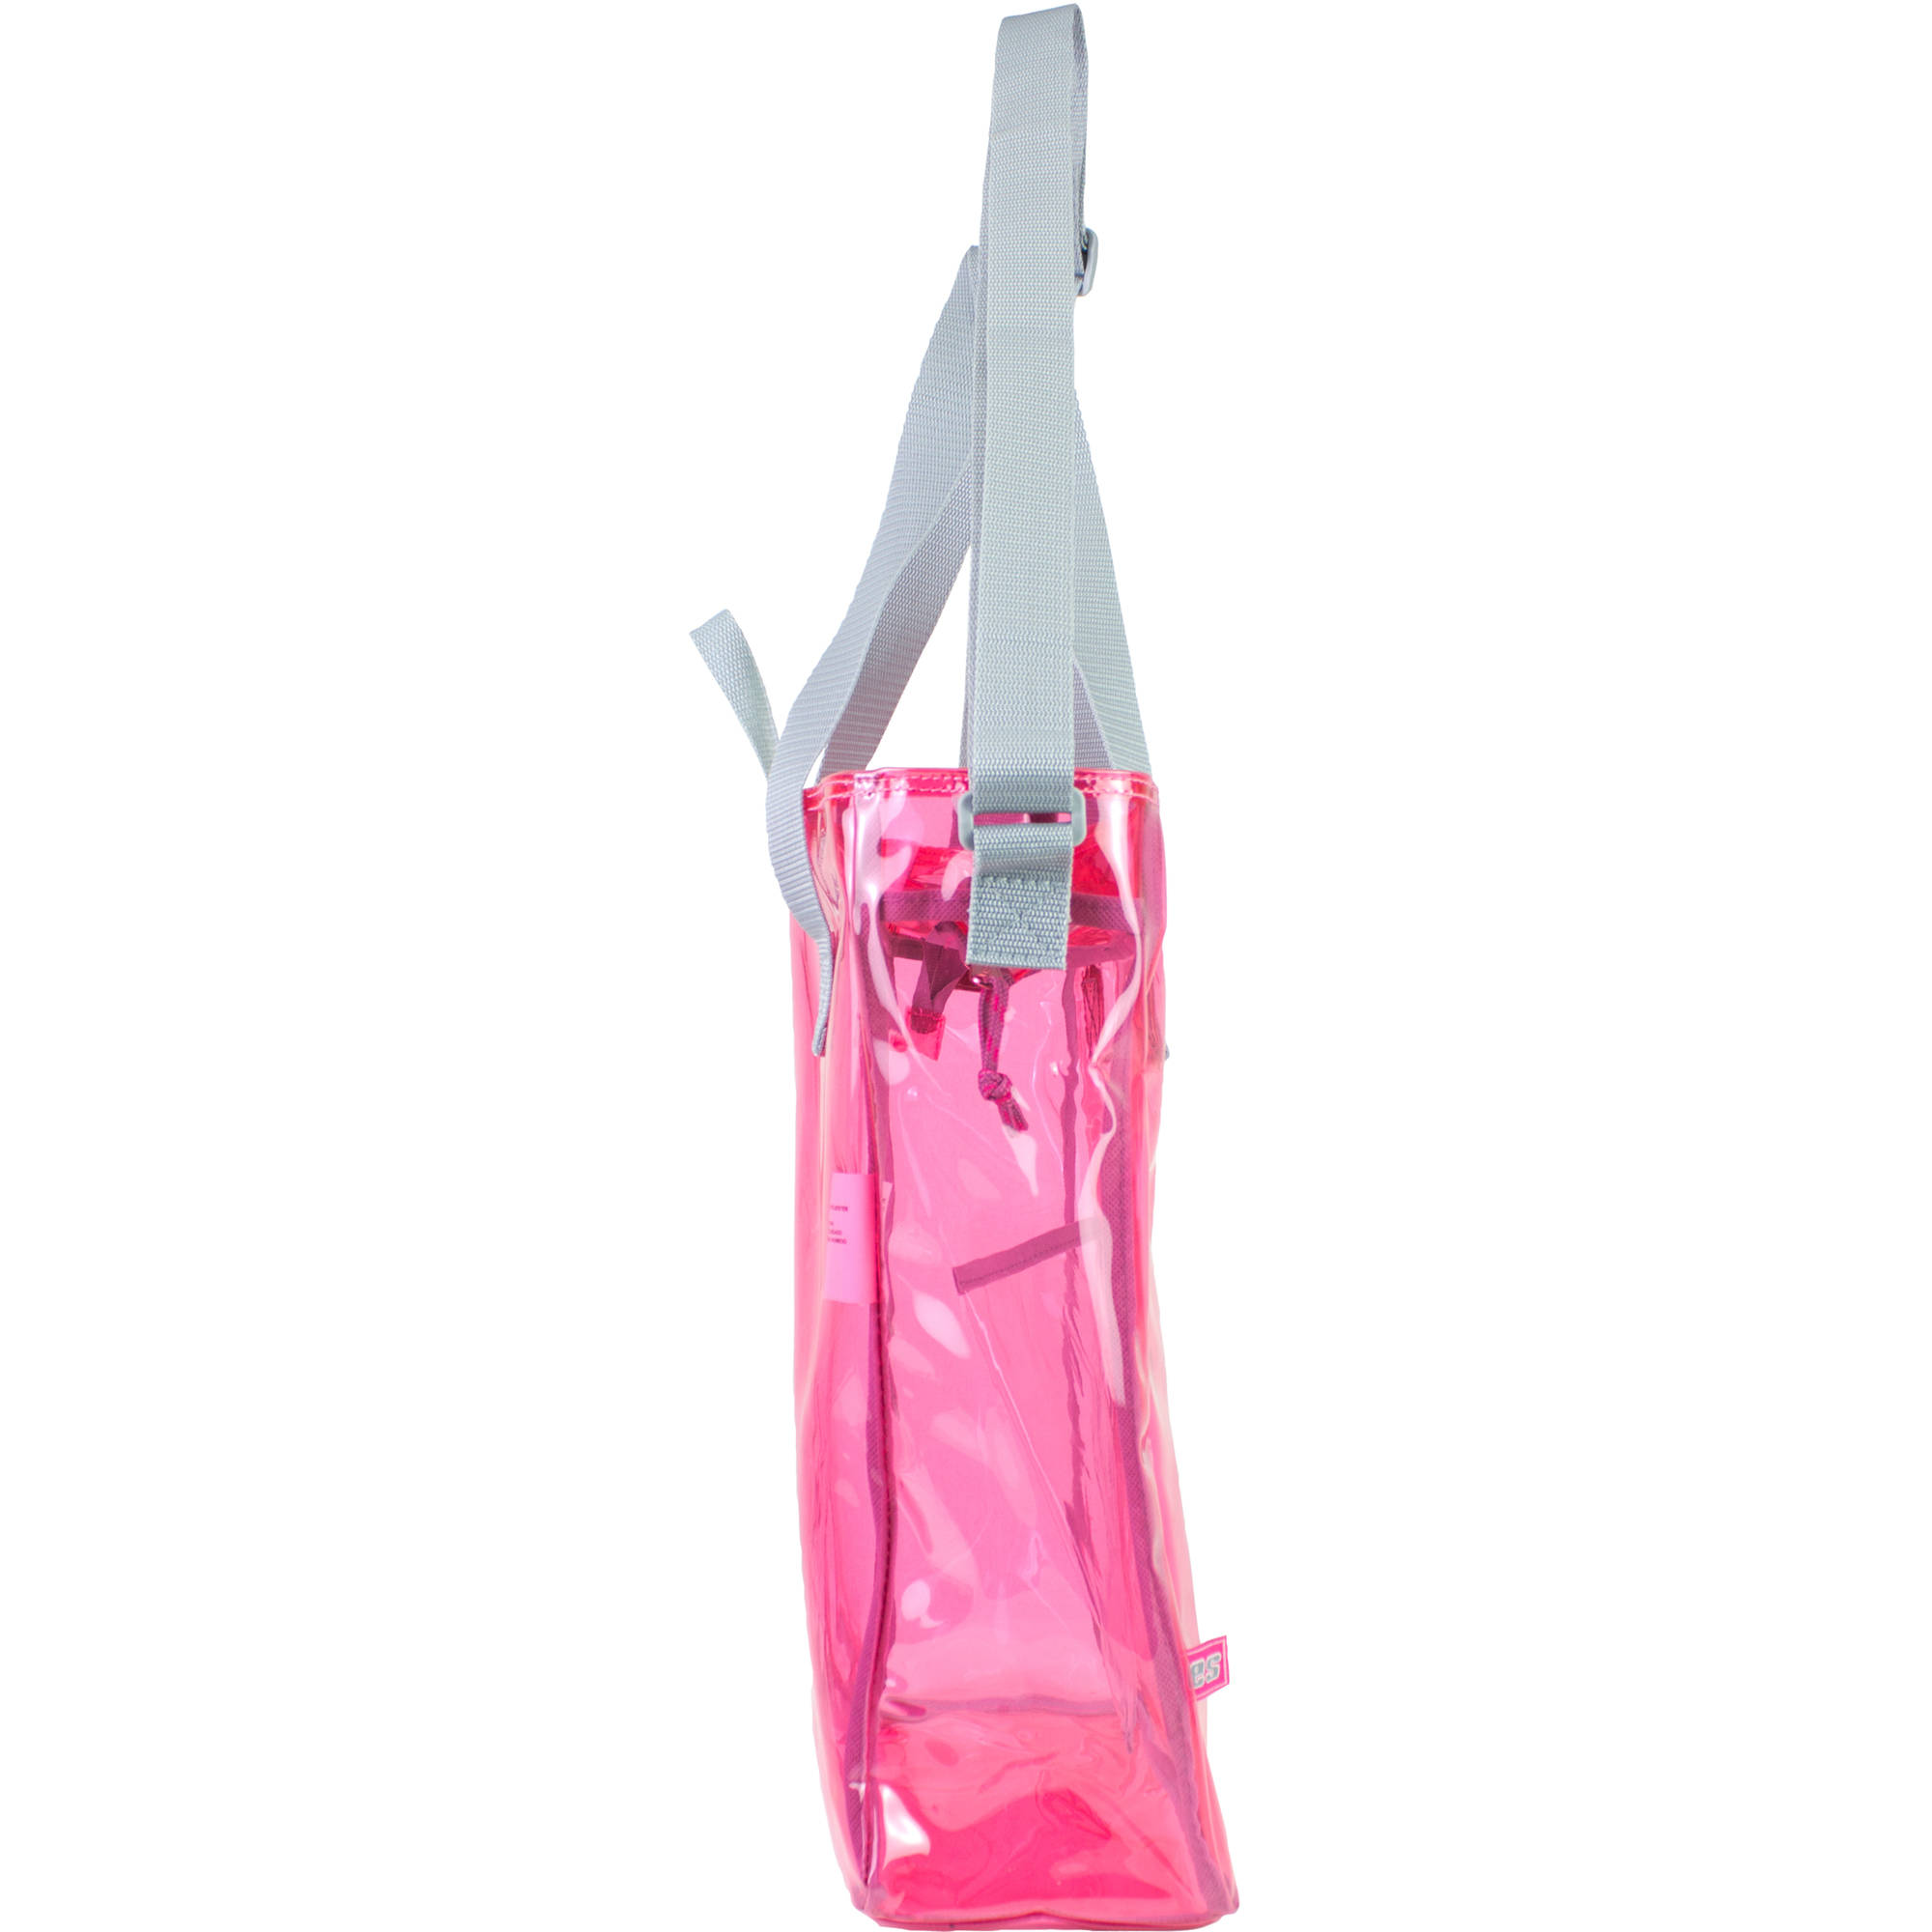 Eastsport Tinted Clear Tote Bag - image 3 of 4